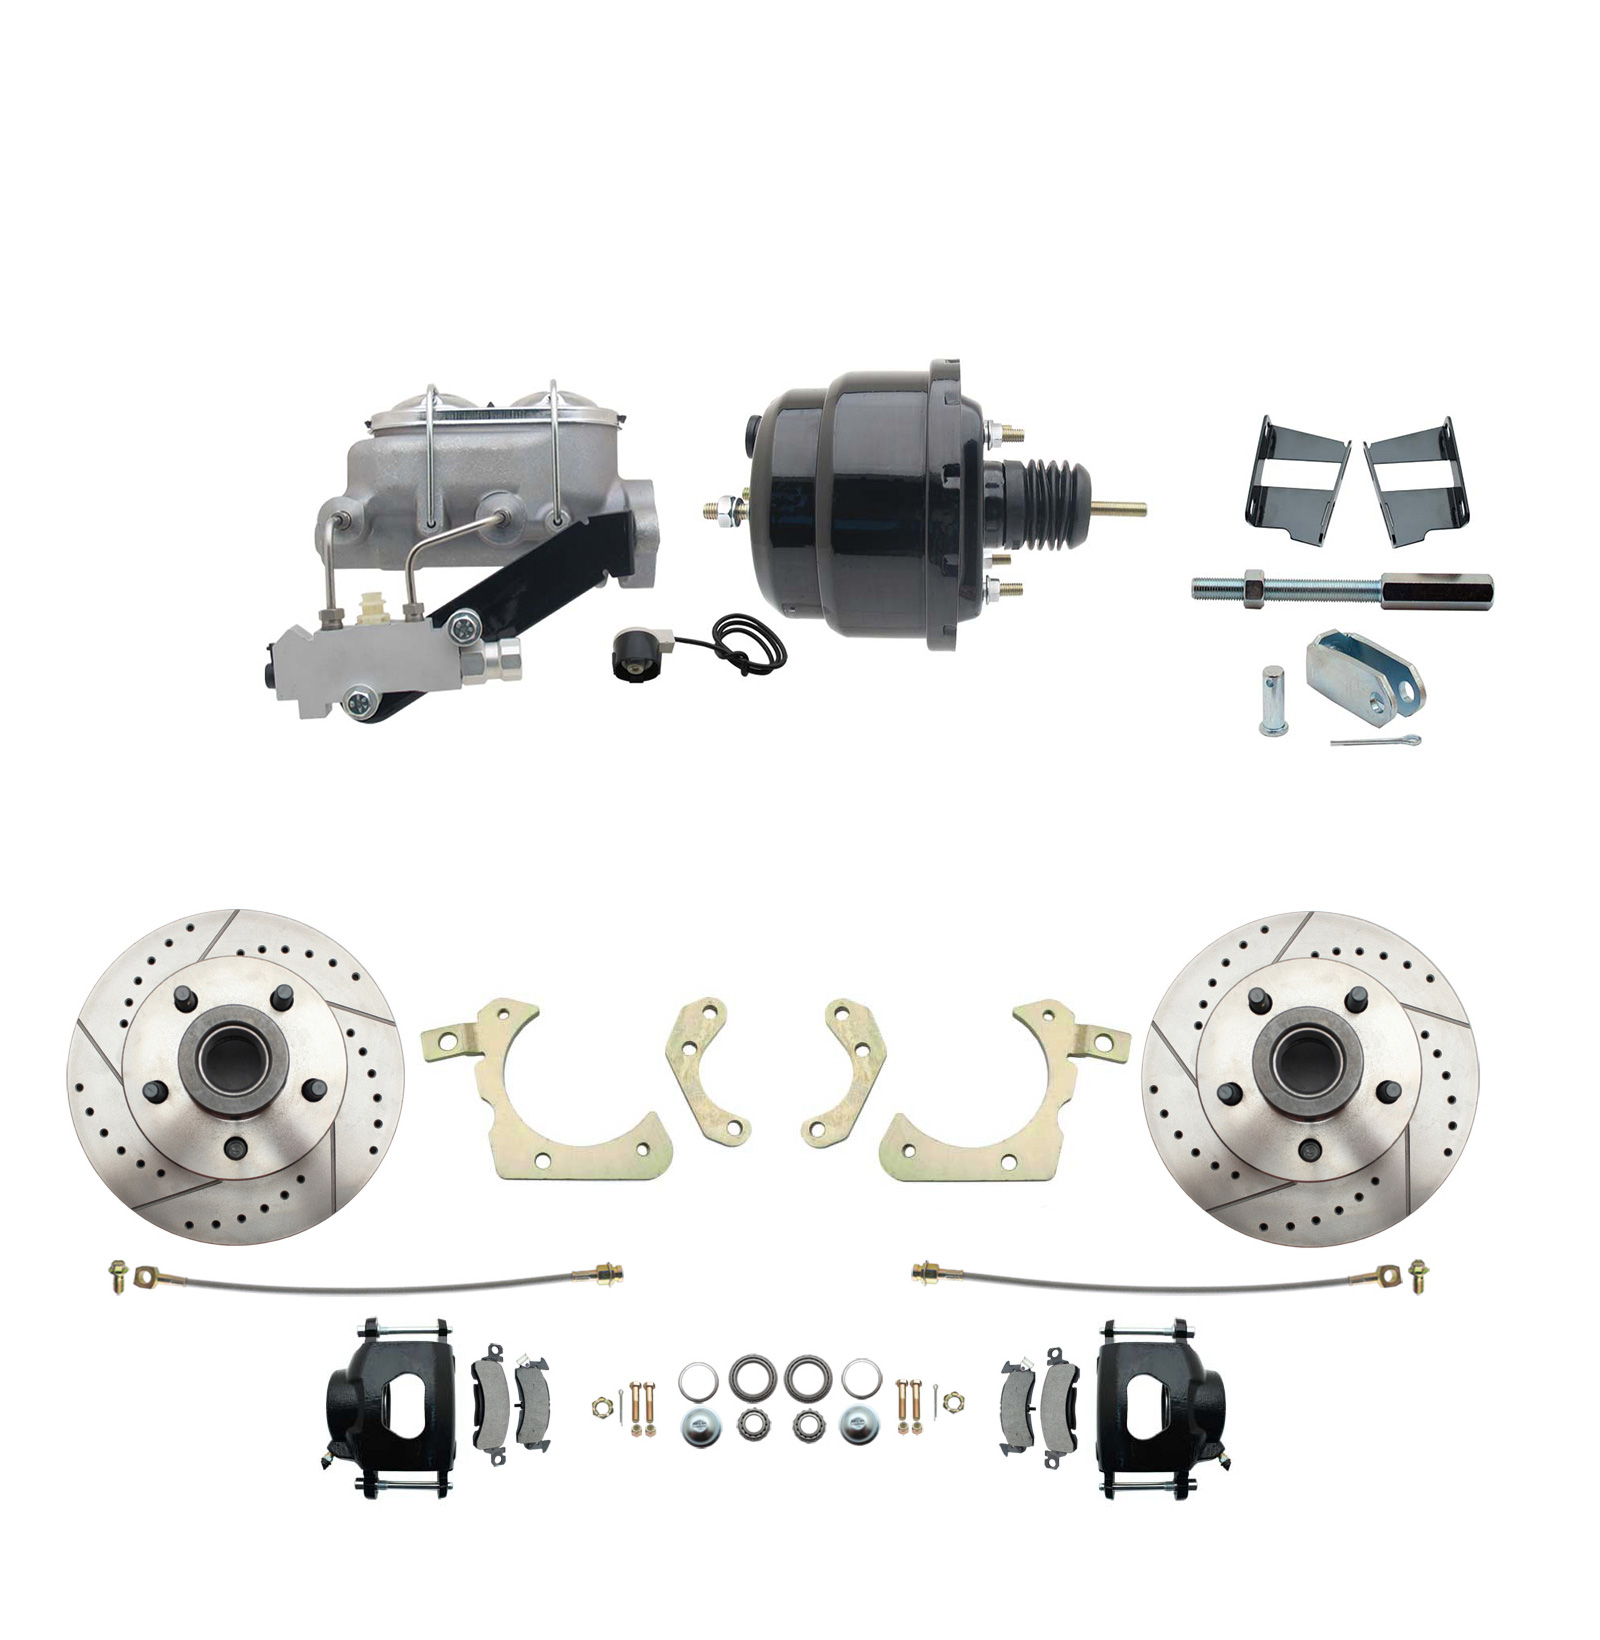 1959-1964 GM Full Size Front Disc Brake Kit Black Powder Coated Calipers Drilled/Slotted Rotors (Impala, Bel Air, Biscayne) & 8 Dual Powder Coated Black Booster Conversion Kit W/ Aluminum Master Cylinder Left Mount Disc/ Drum